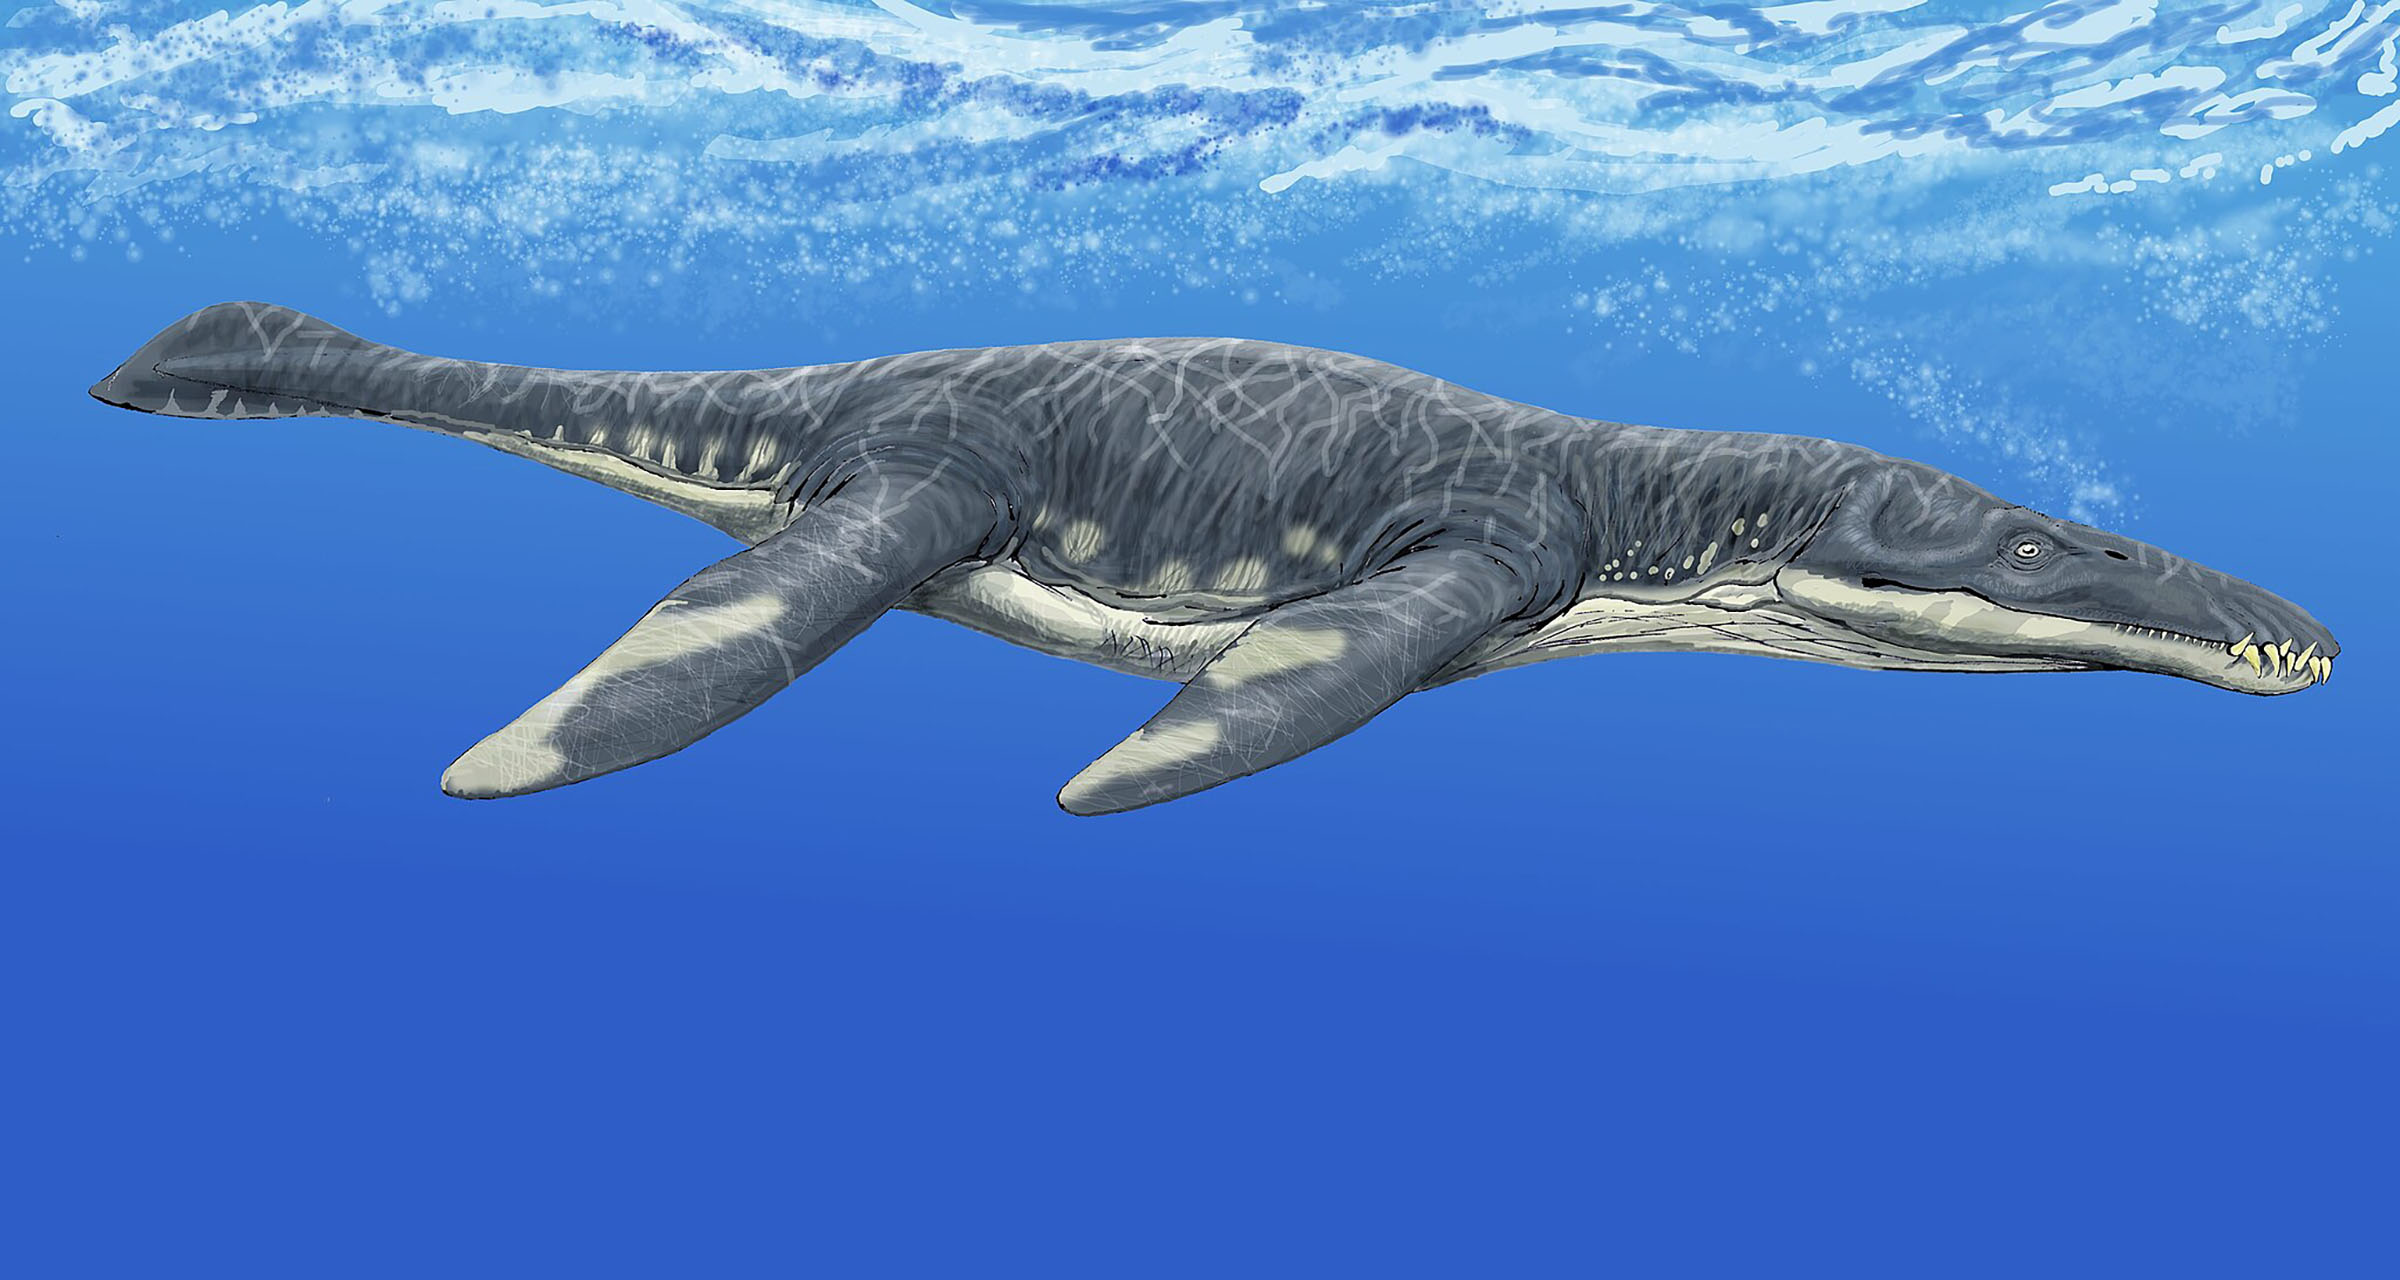 An illustration of a large gray spotted sea creature in deep blue water